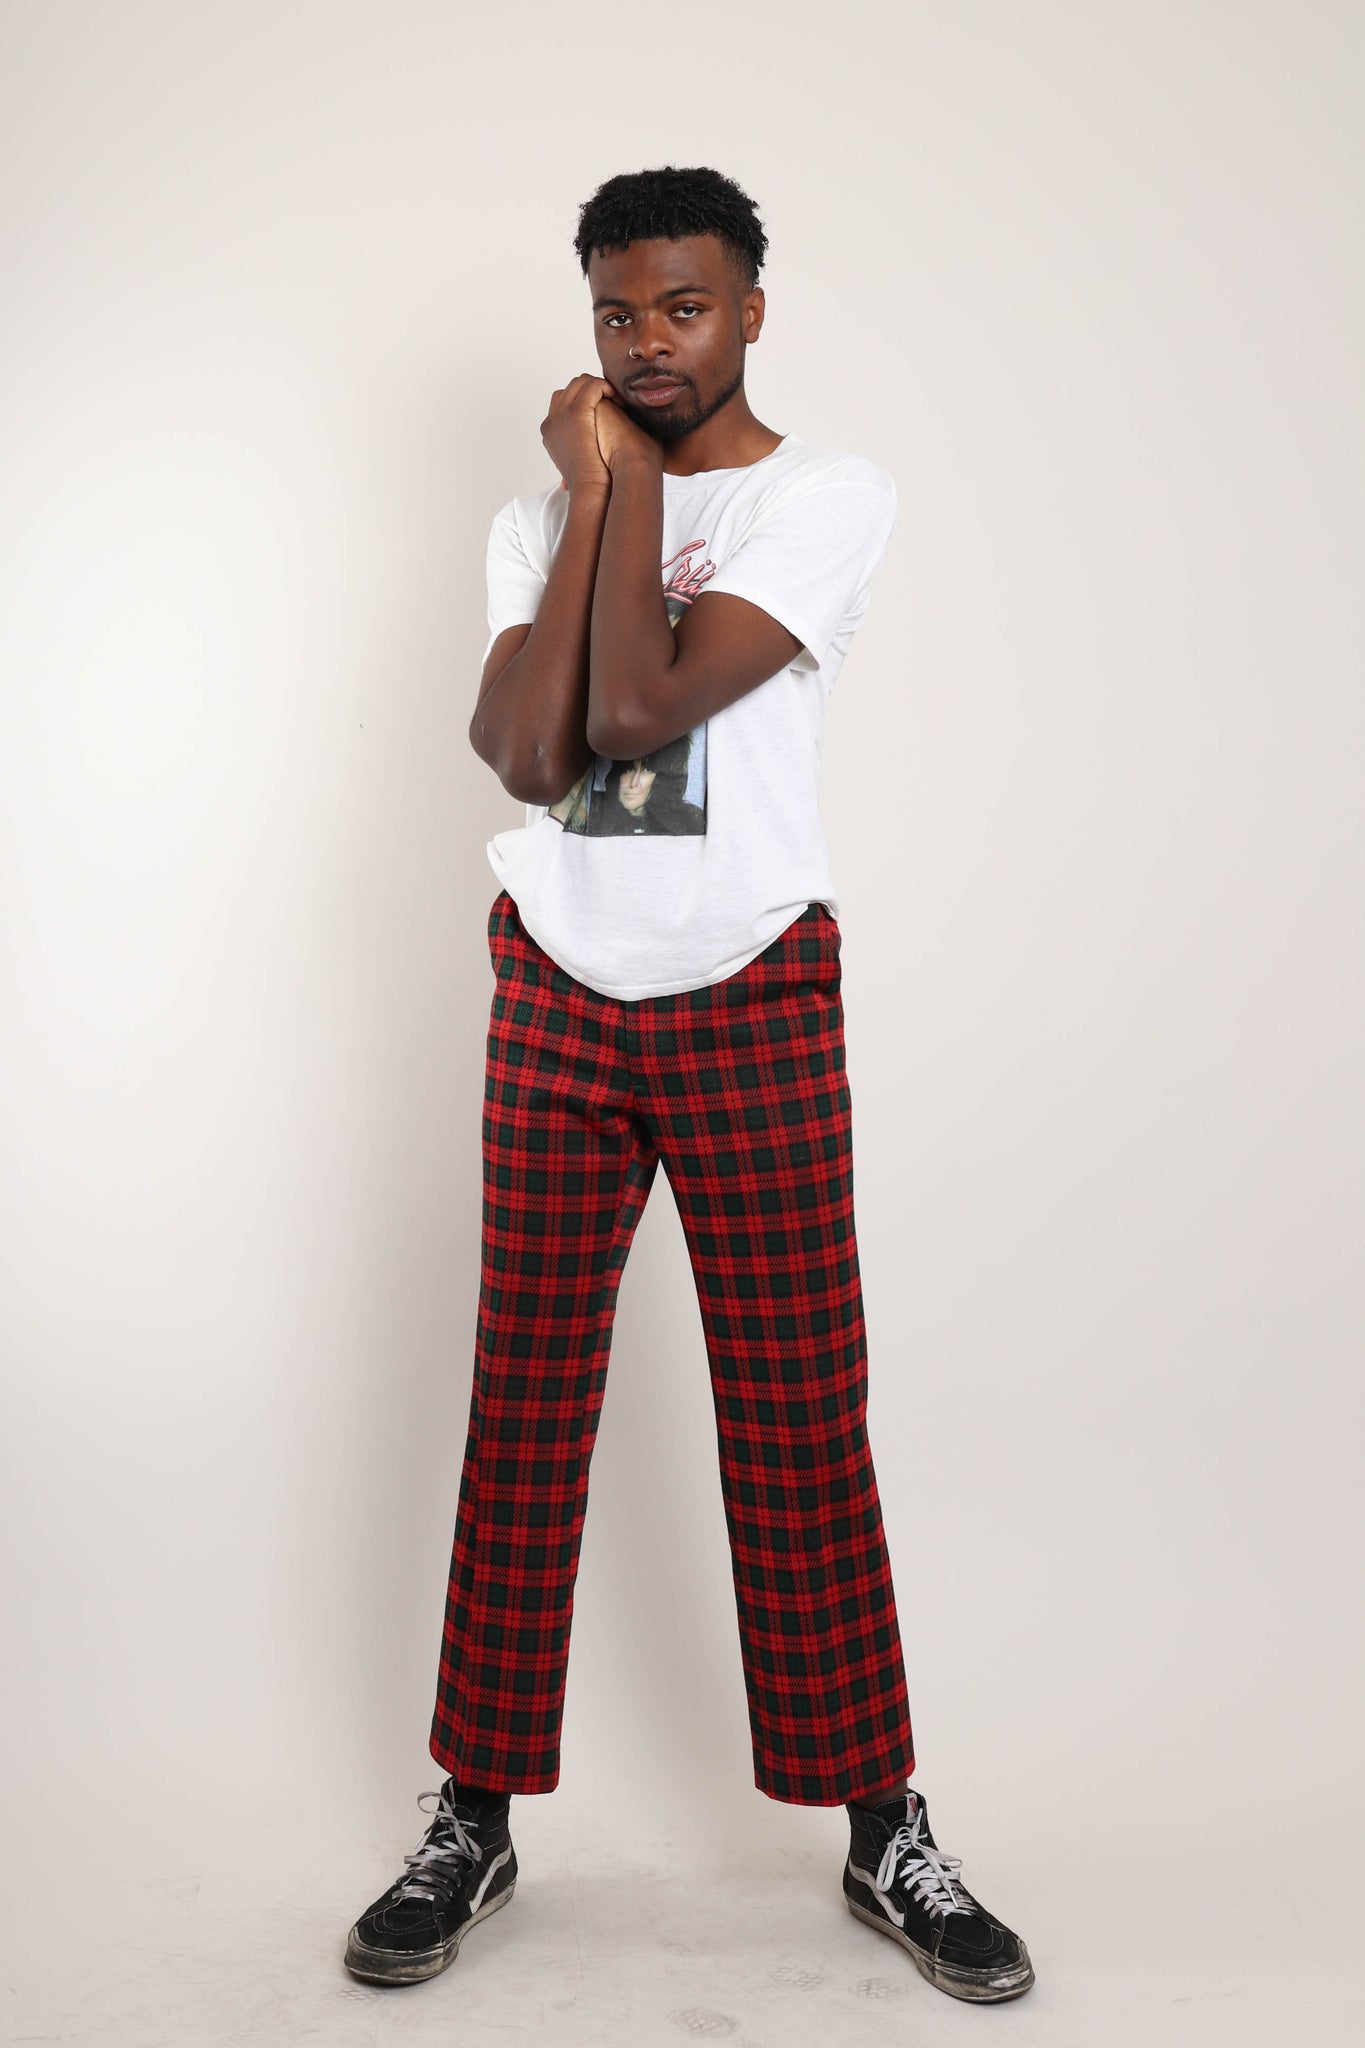 Red Plaid Pants Chic and Grunge Outfit Ideas  FMagcom